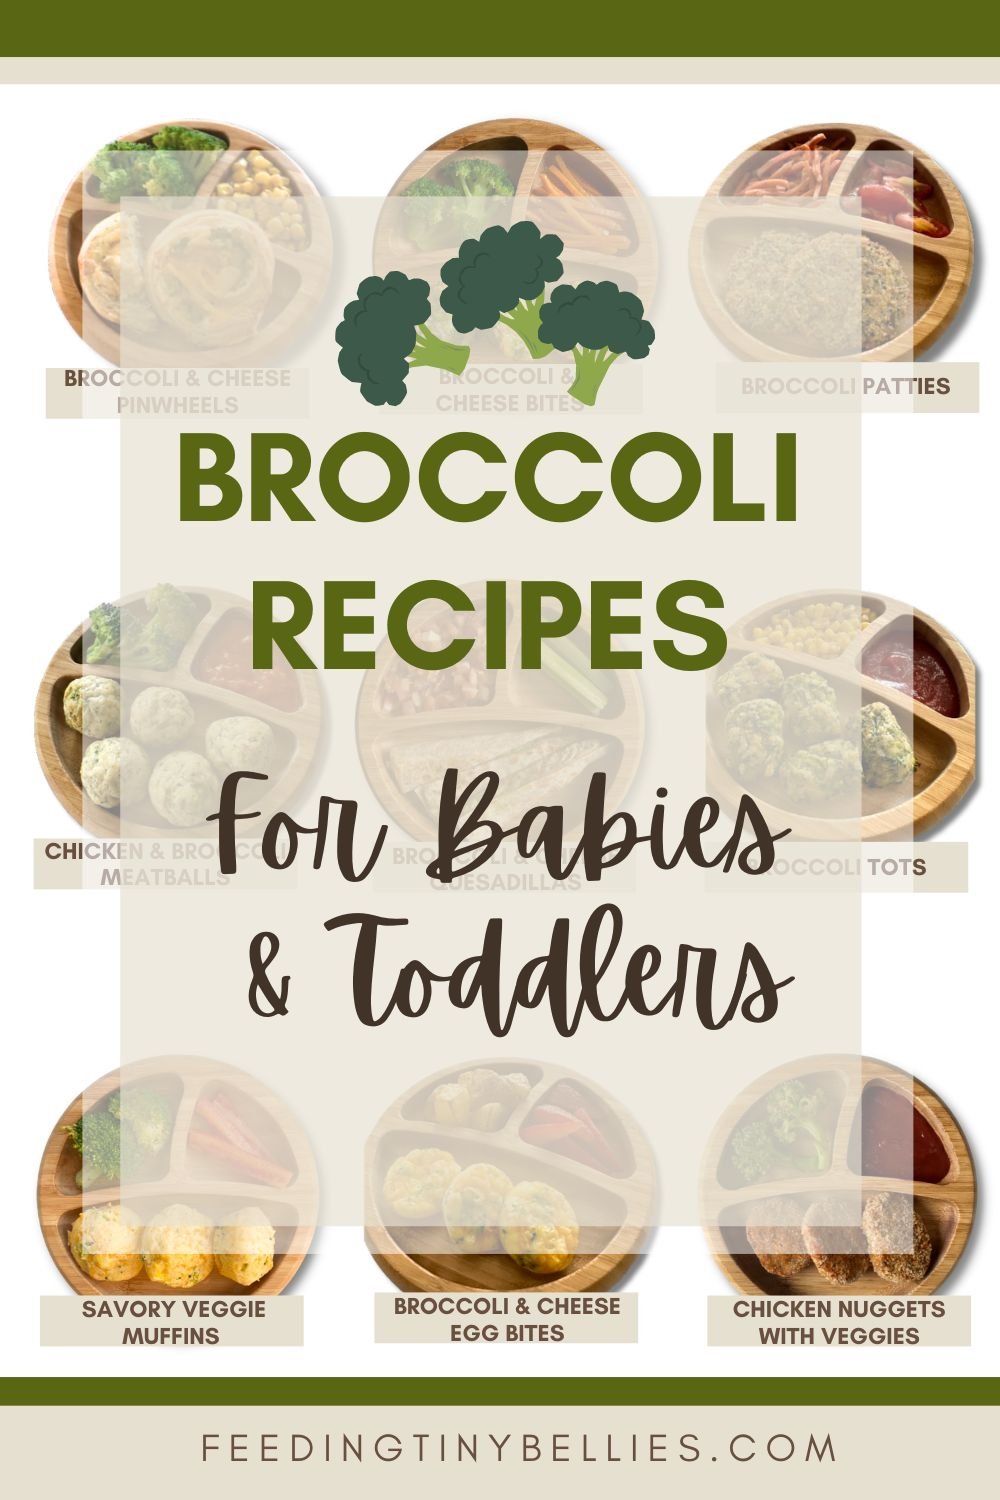 Broccoli recipes for babies and toddlers.